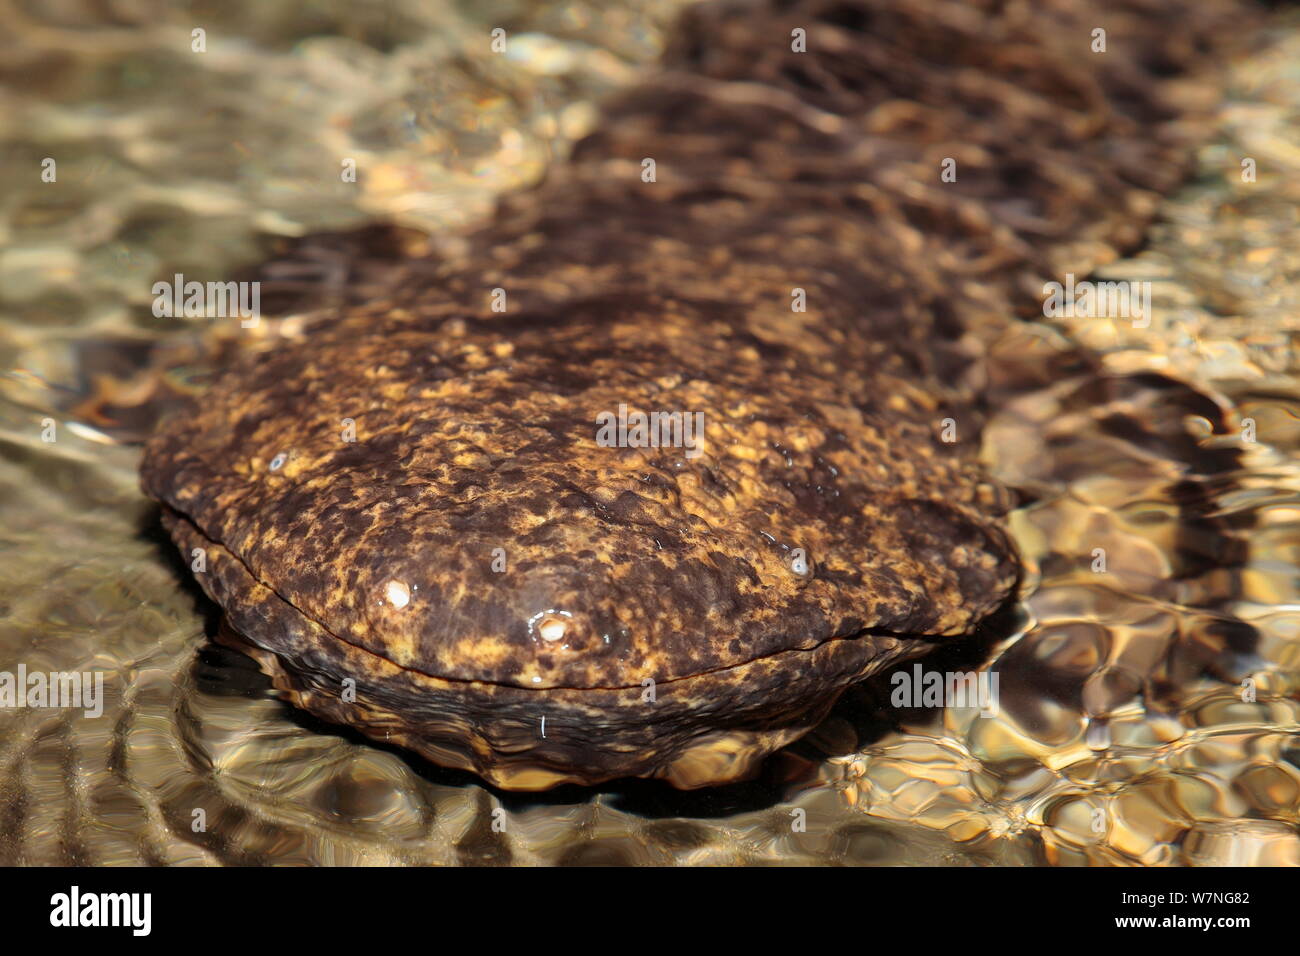 Japanese giant salamander (Andrias japonicus) reaching up to the surface to breathe, Japan, August Stock Photo